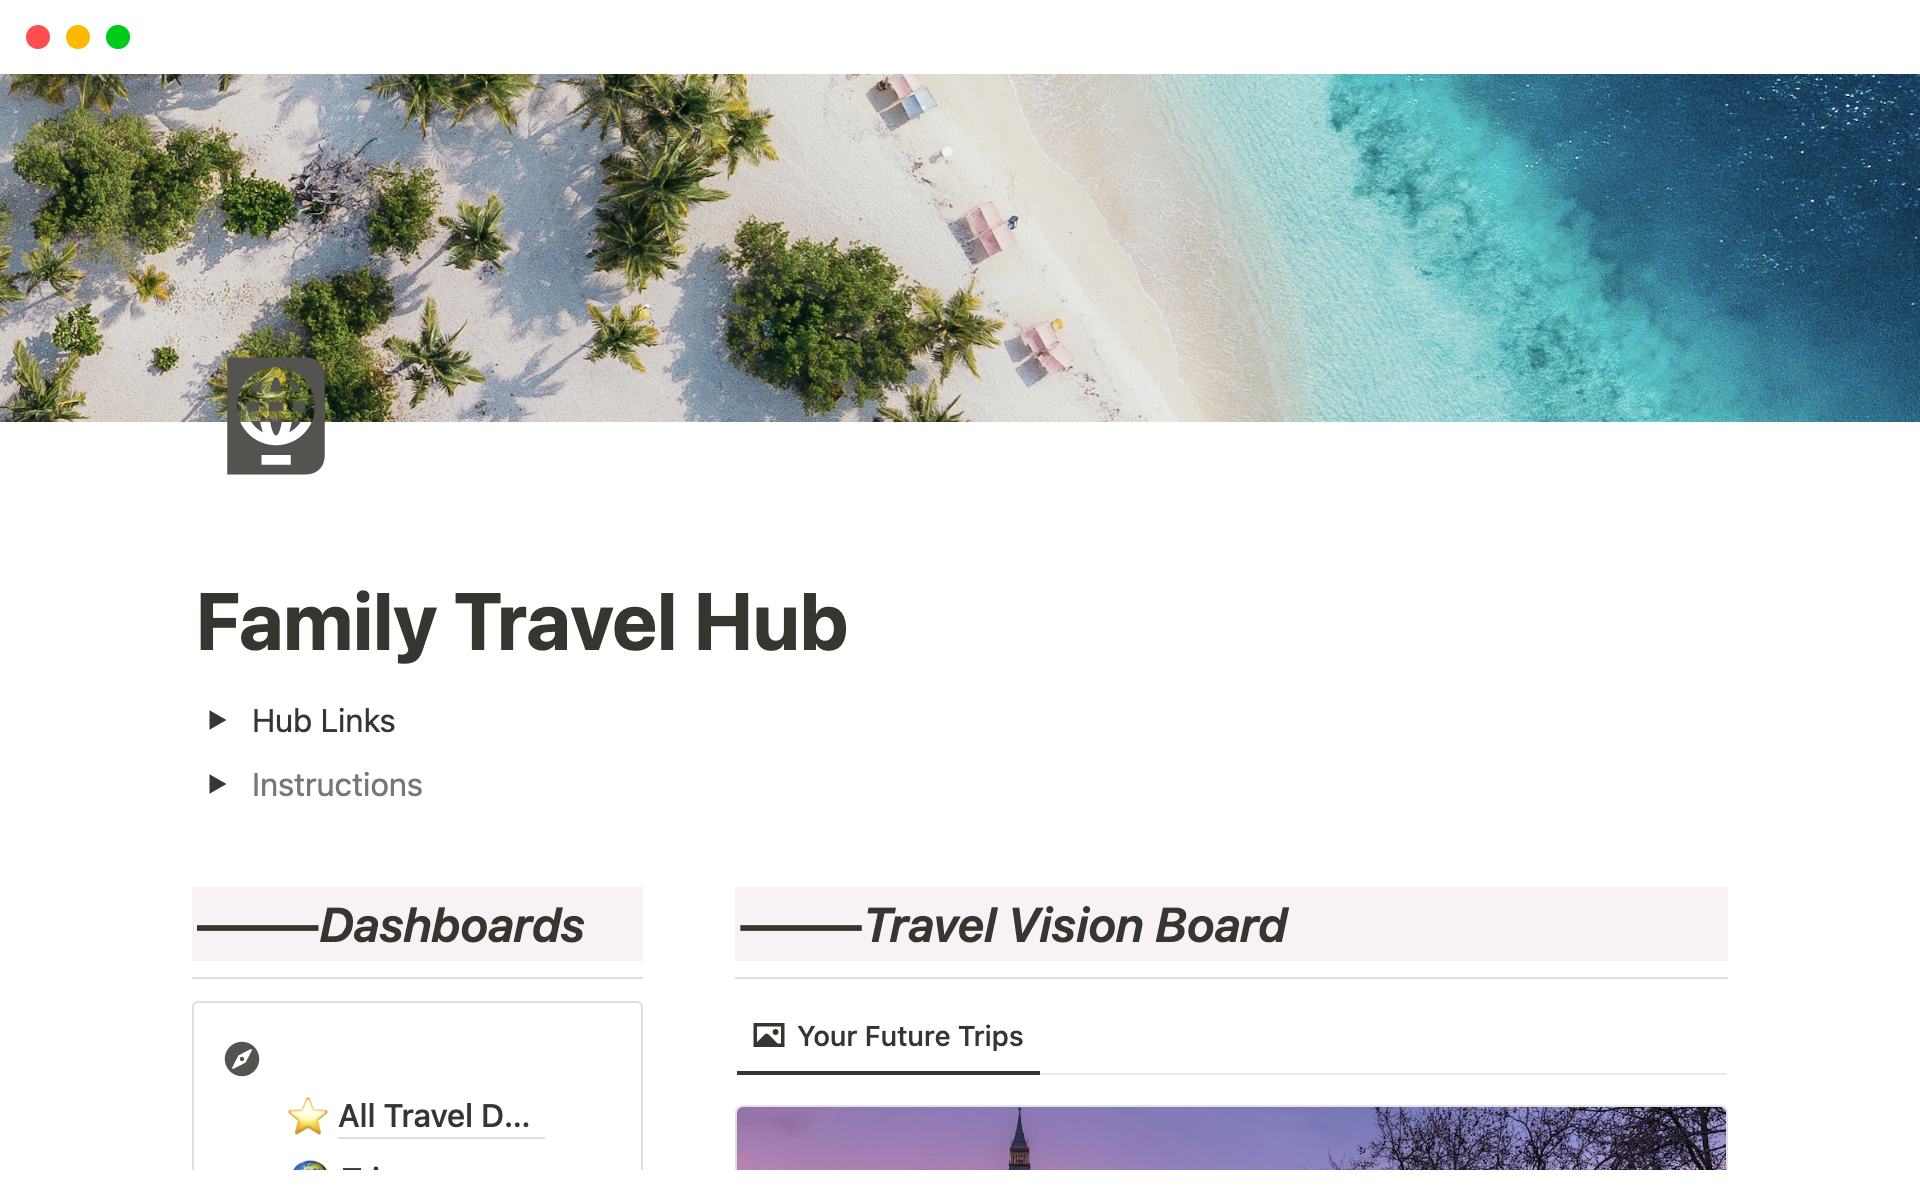 Helps traveling individuals and families organize all of their travel plans in one place.